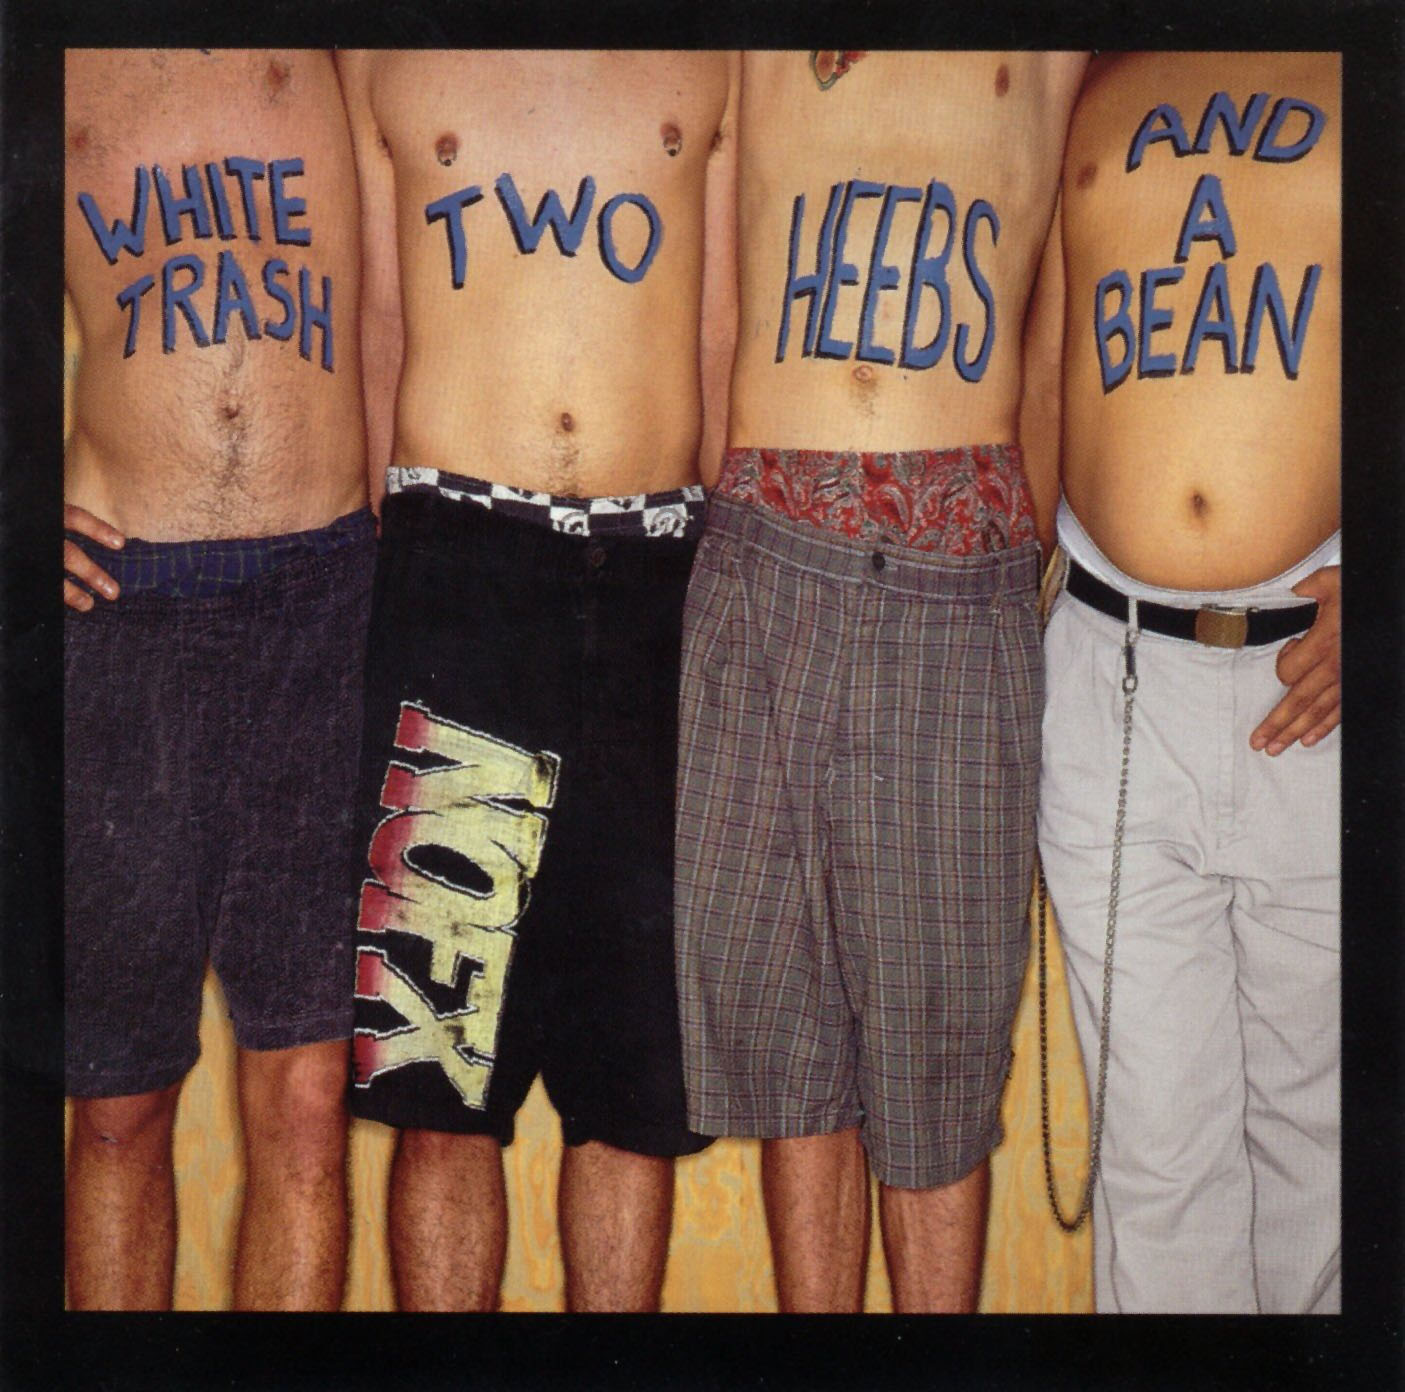 Cartula Frontal de Nofx - White Trash, Two Heebs And A Bean